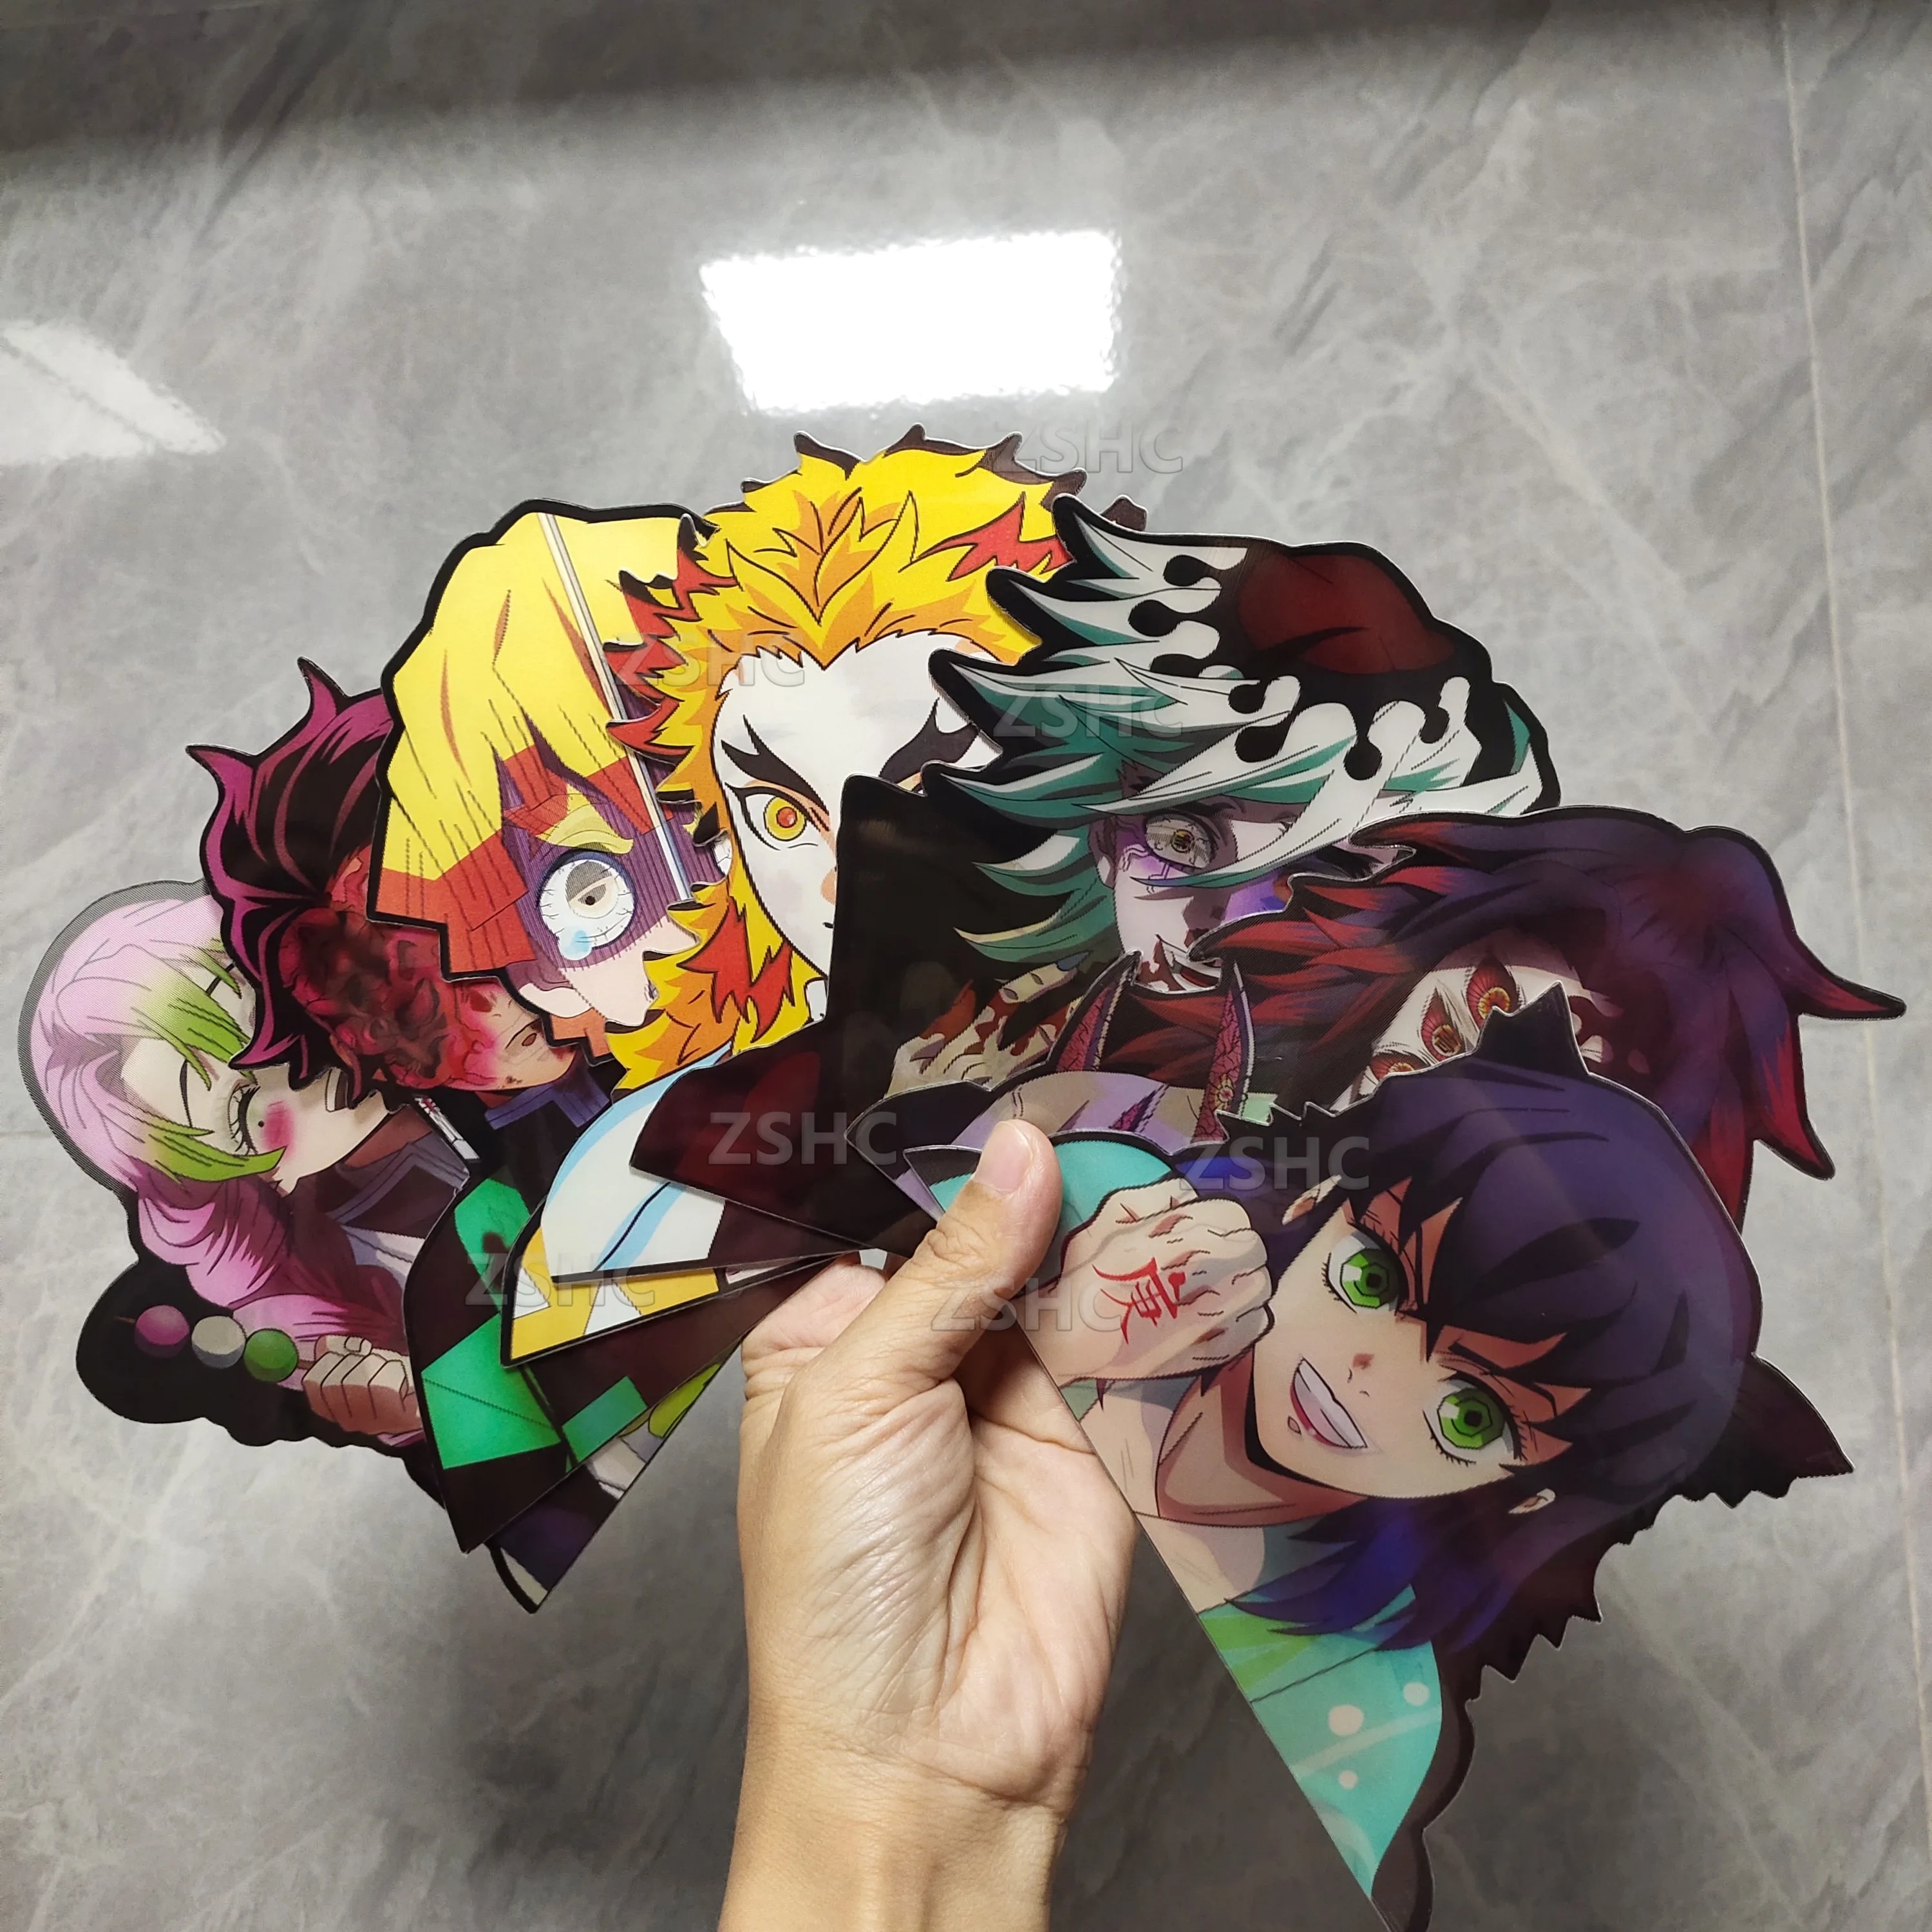 【36 Desings】Demon Slayer Anime Motion Sticker Waterproof Decals for Cars,Laptop,Refrigerator,Suitcase,Wall,Etc. Toy Gift